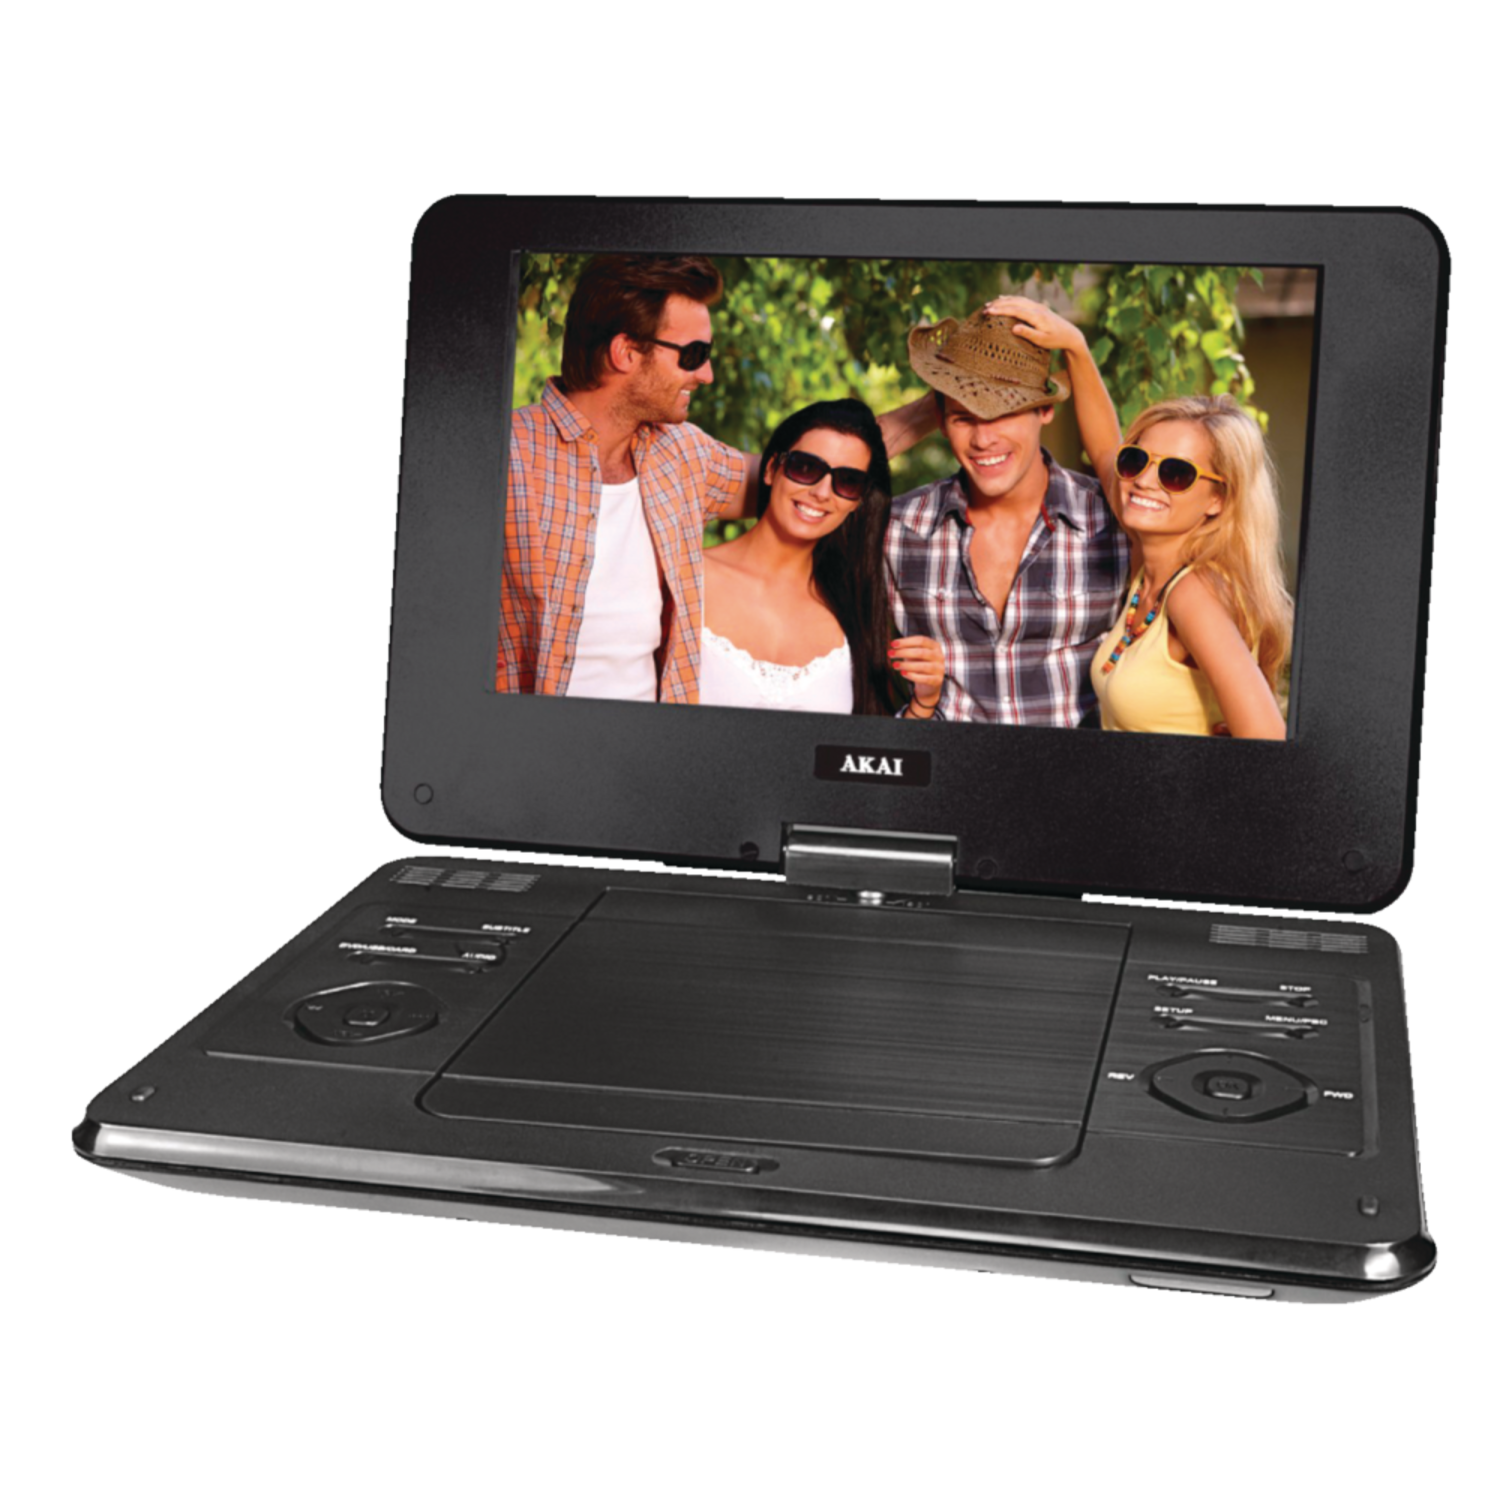 Refurbished (Excellent) - AKAI 9" Portable DVD Player - w/Swivel Screen